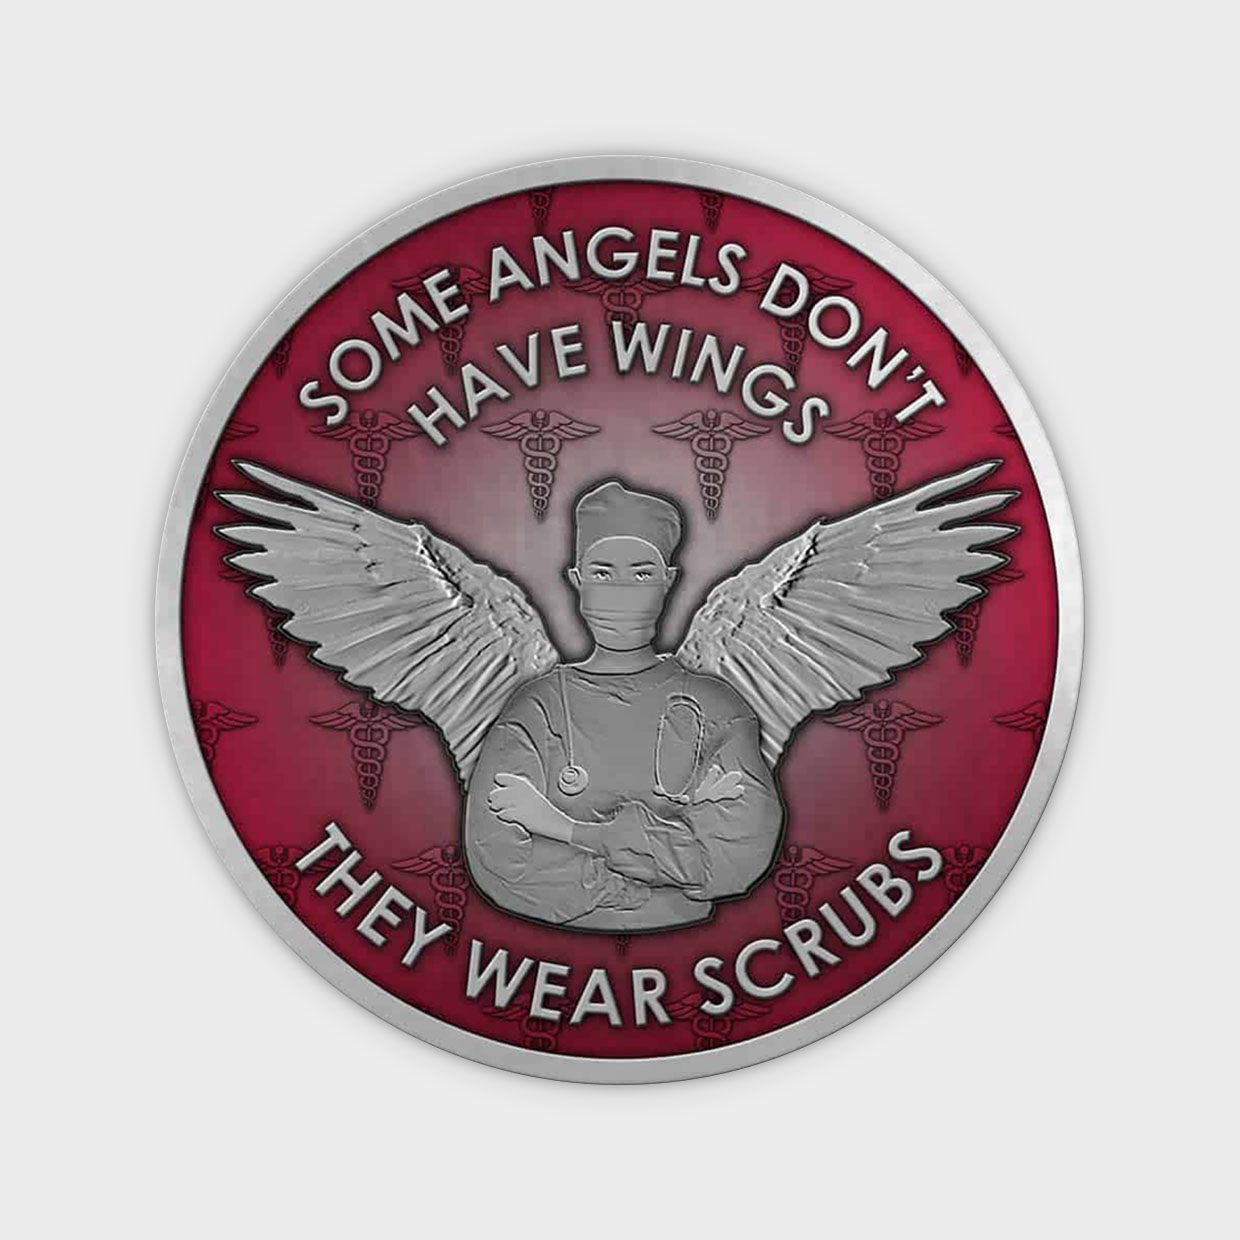 Some Angels Don't Have Wings Coin Obverse